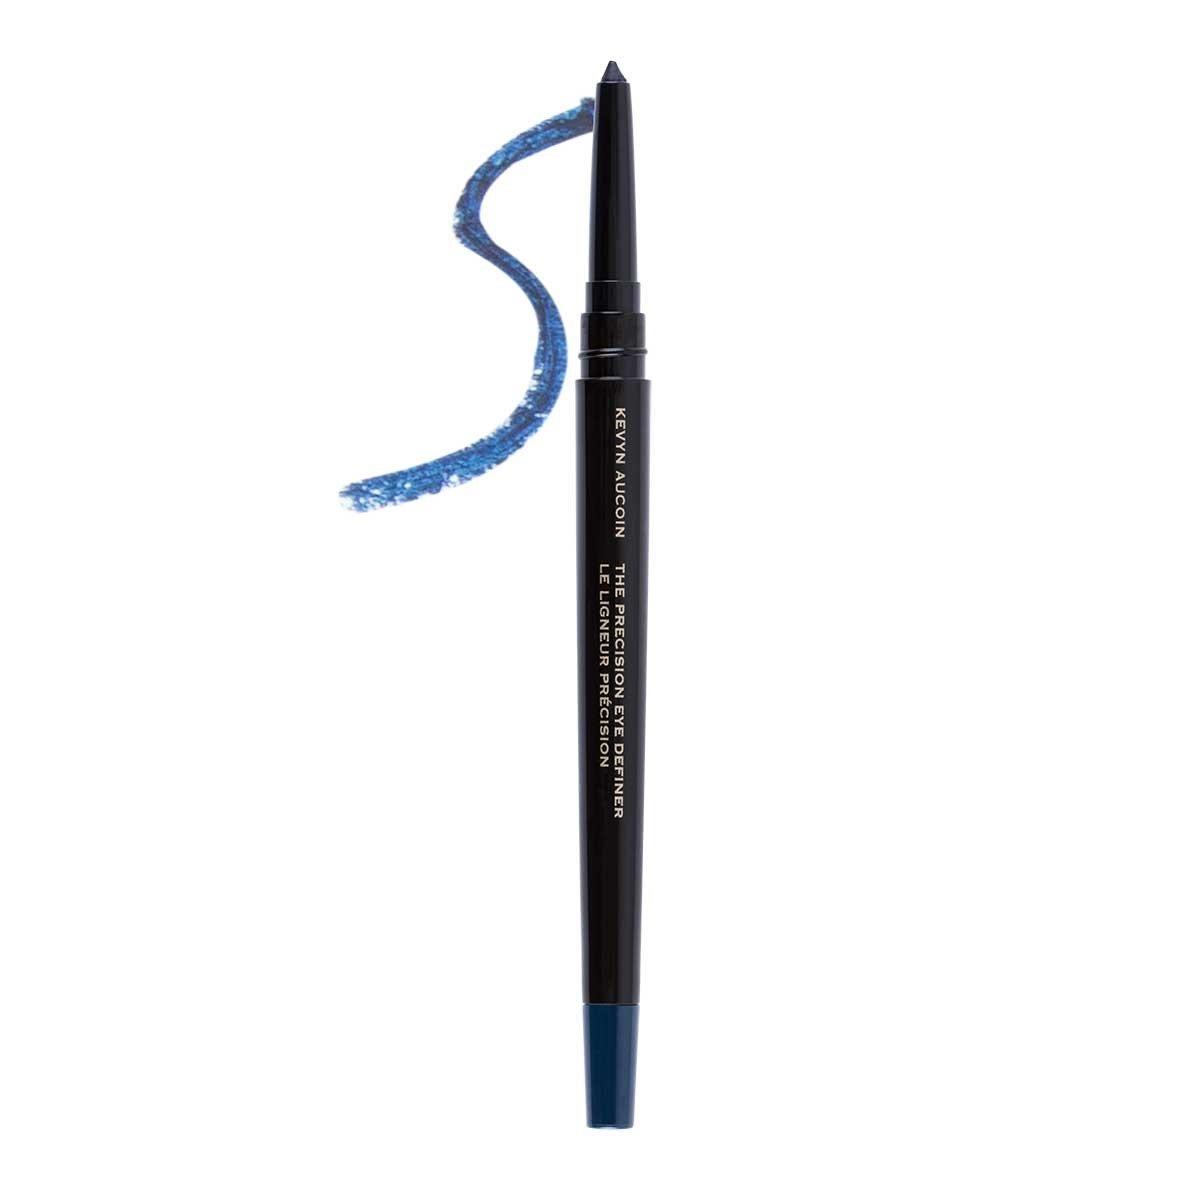 Kevyn Aucoin The Precision Eye Definer Cadence (smoked blue)